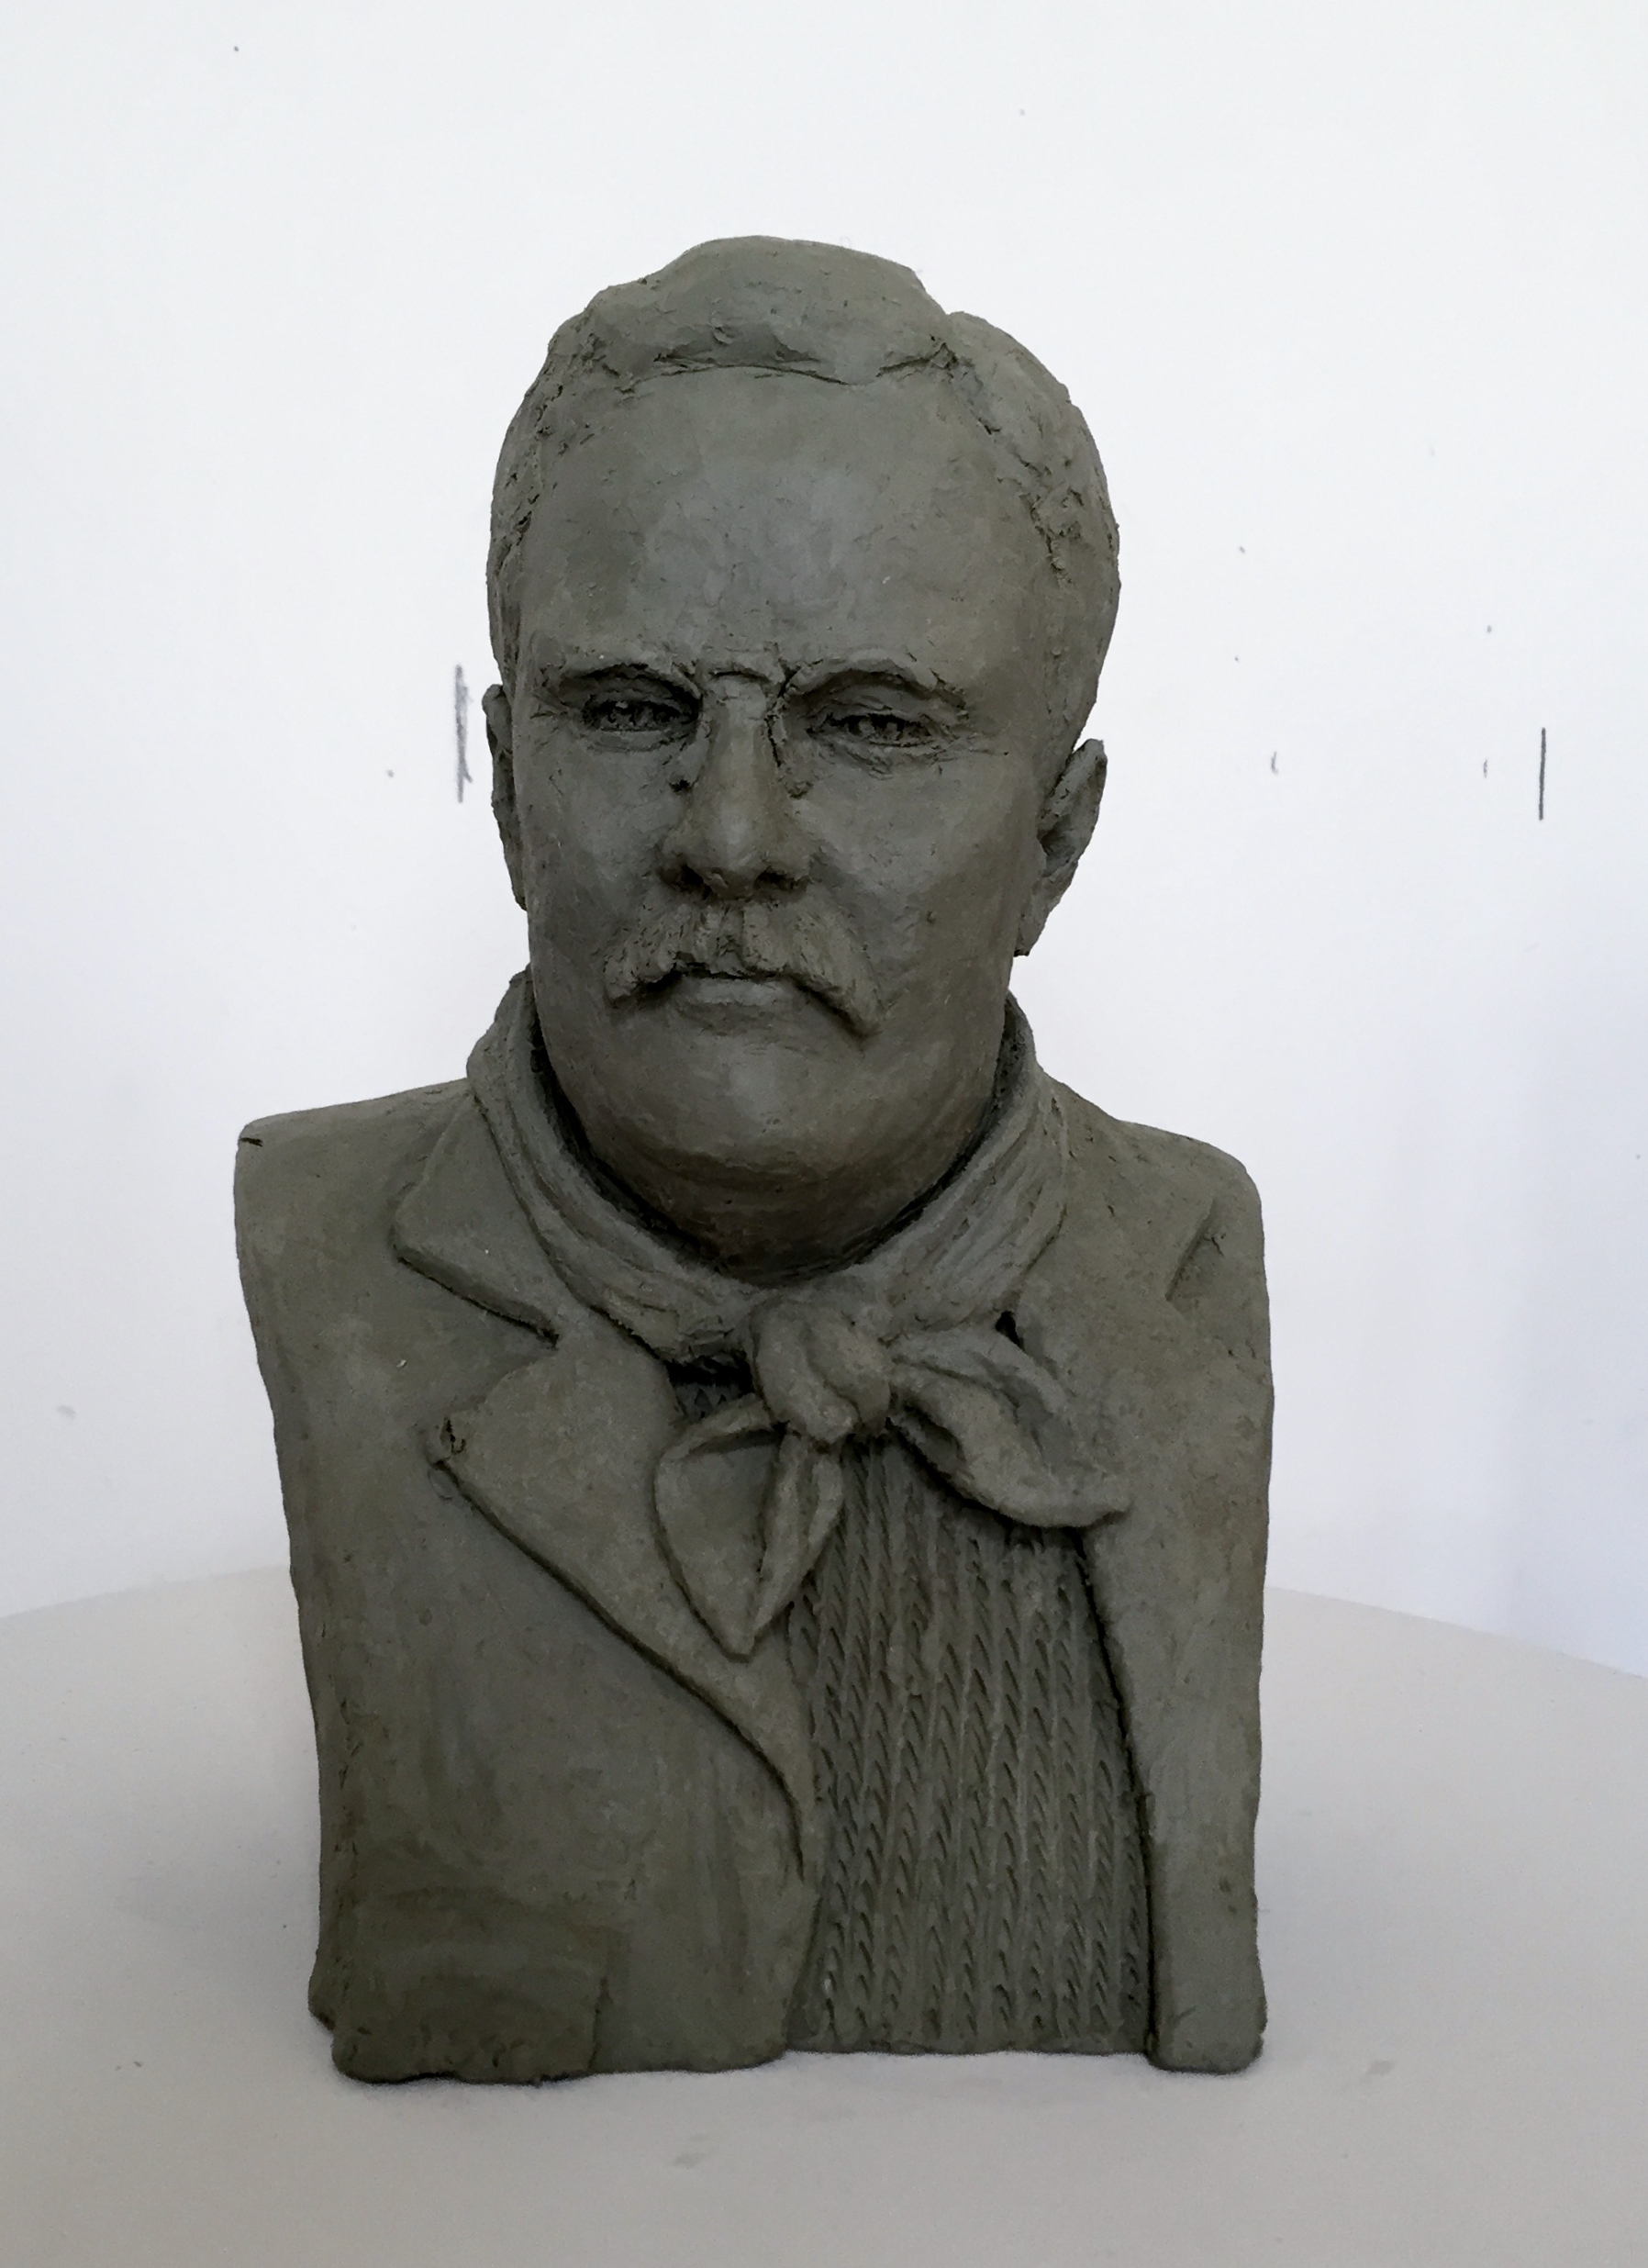 Theodore Roosevelt by Charles Bergen (MG: June 2015)